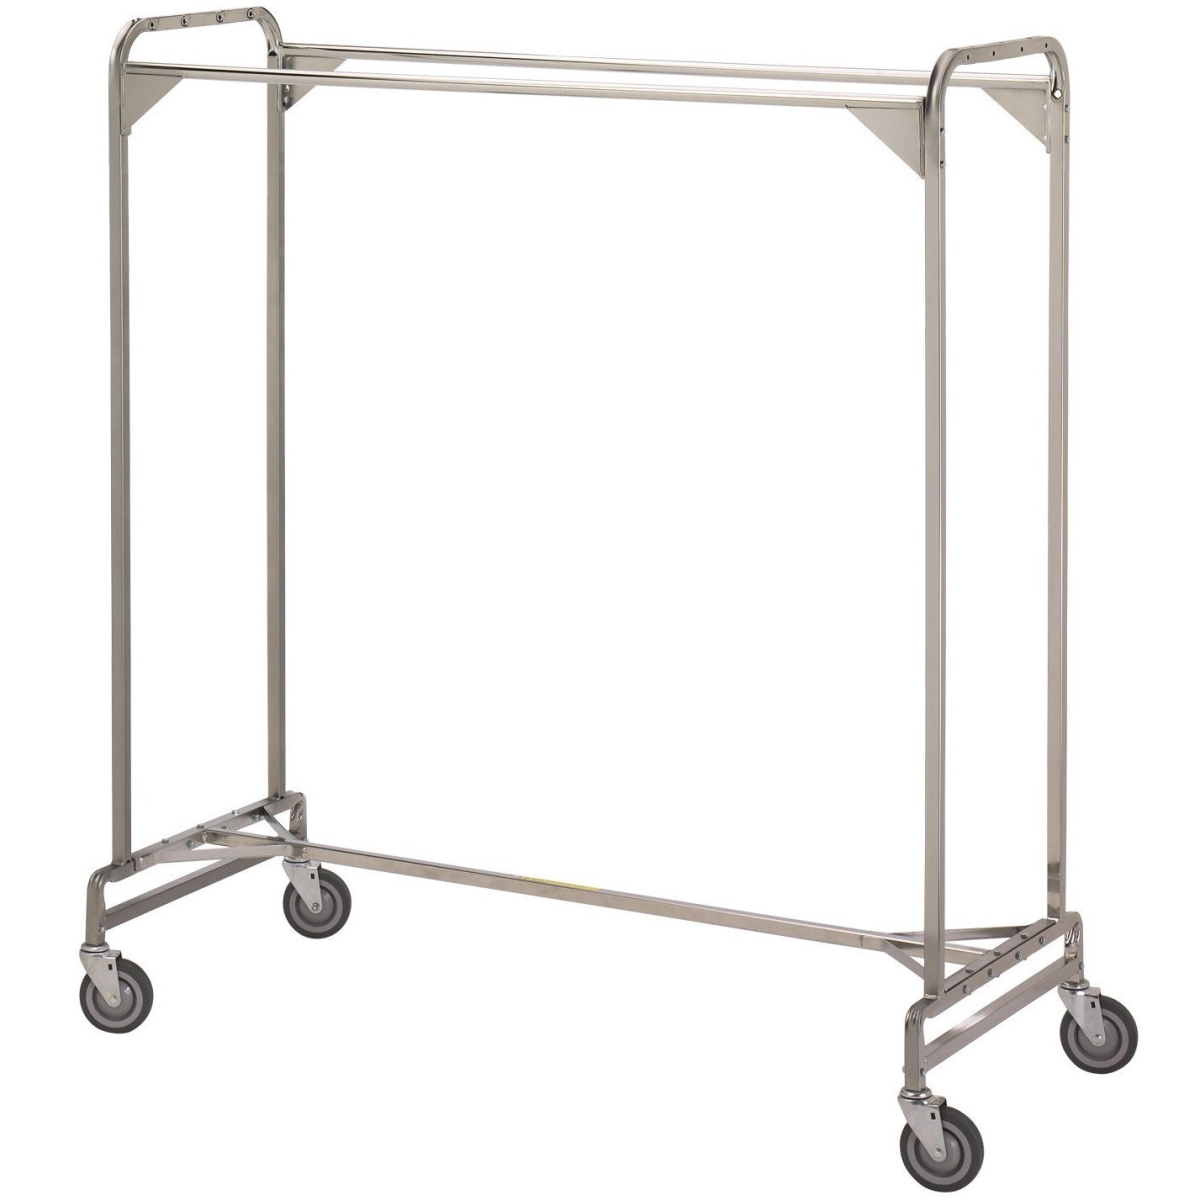 R & B Wire 742 Cover Kit For 725 Garment Rack